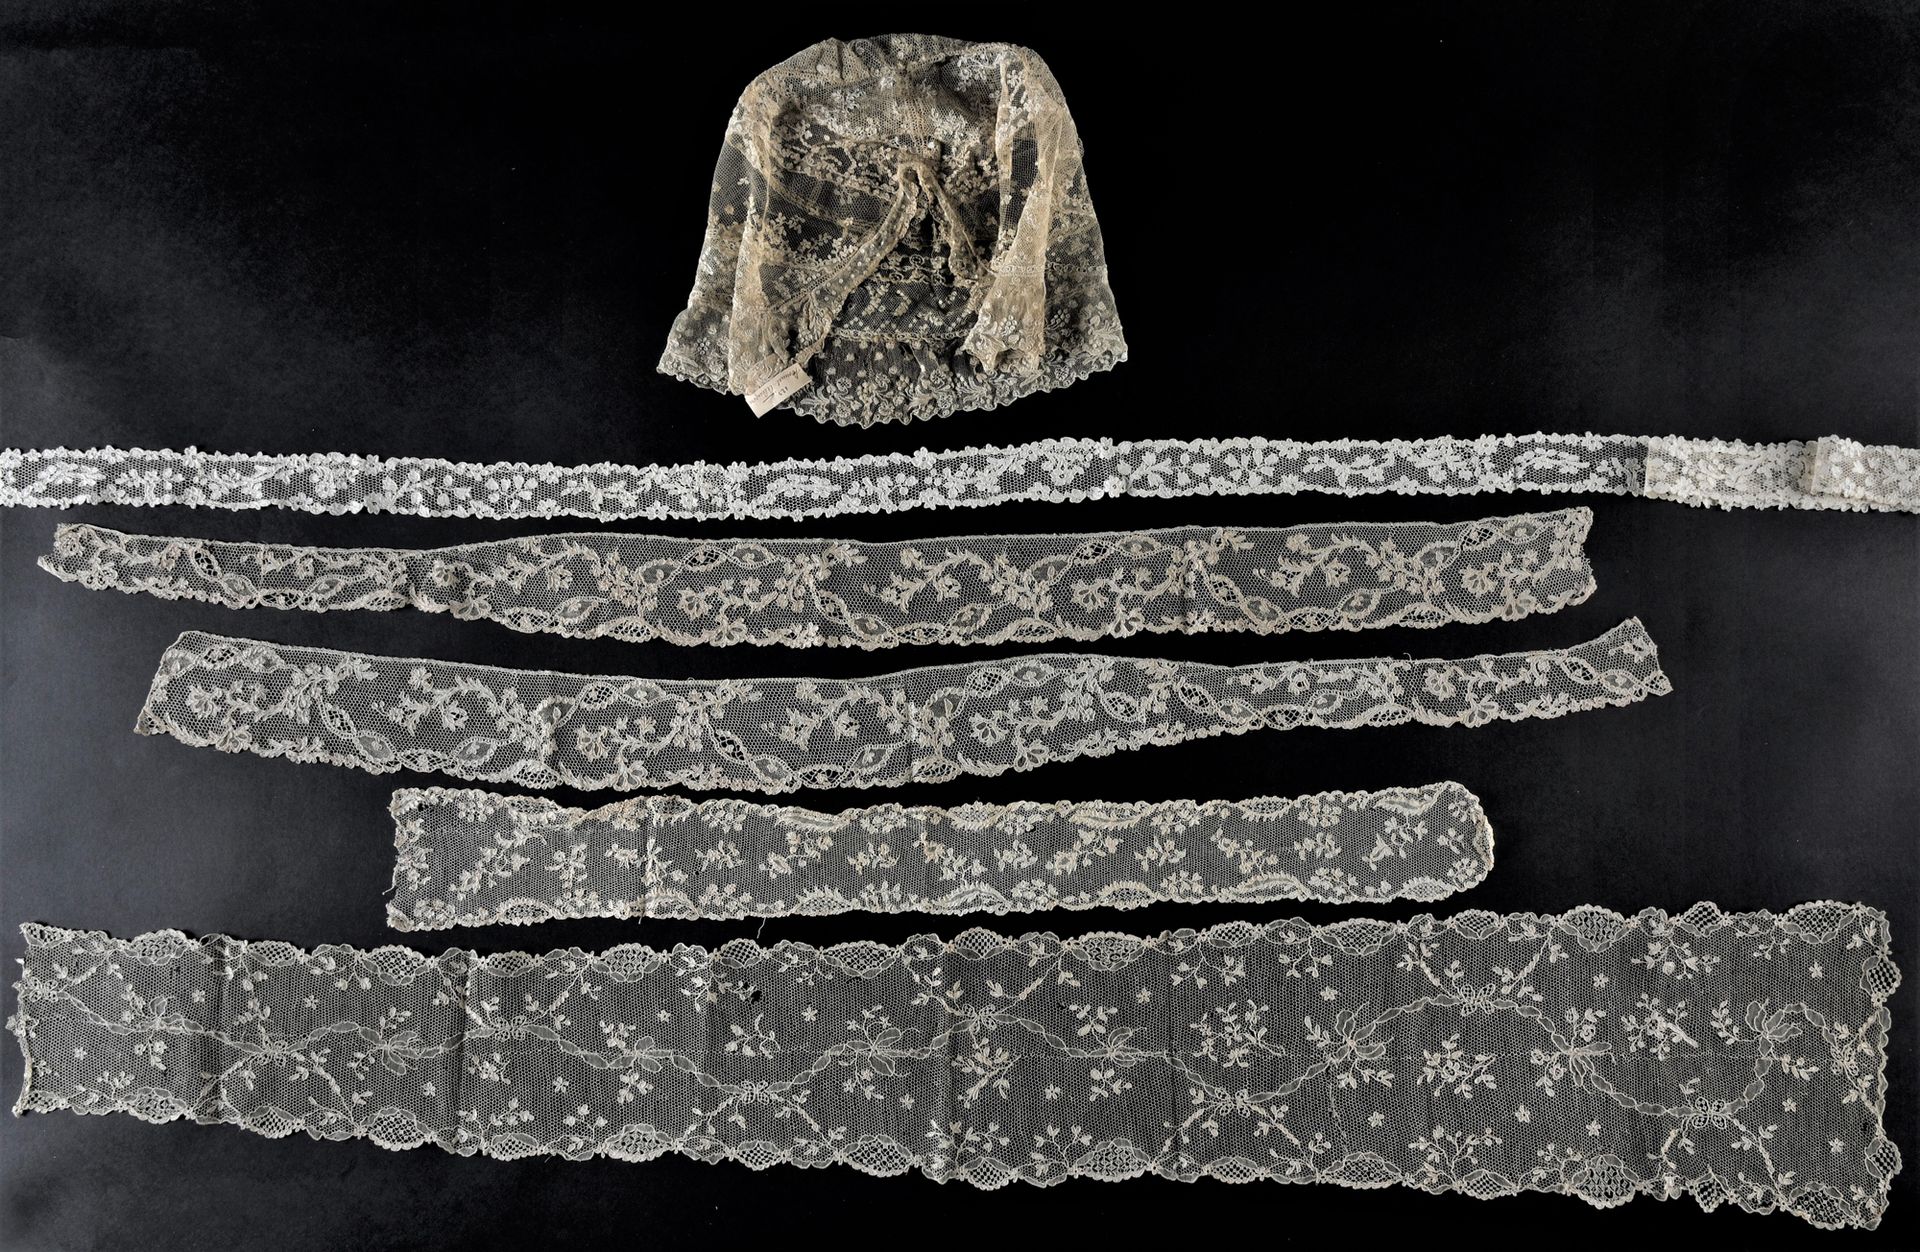 Null Women's costume accessories in needle lace, Argentan, circa 1760-70.

With &hellip;